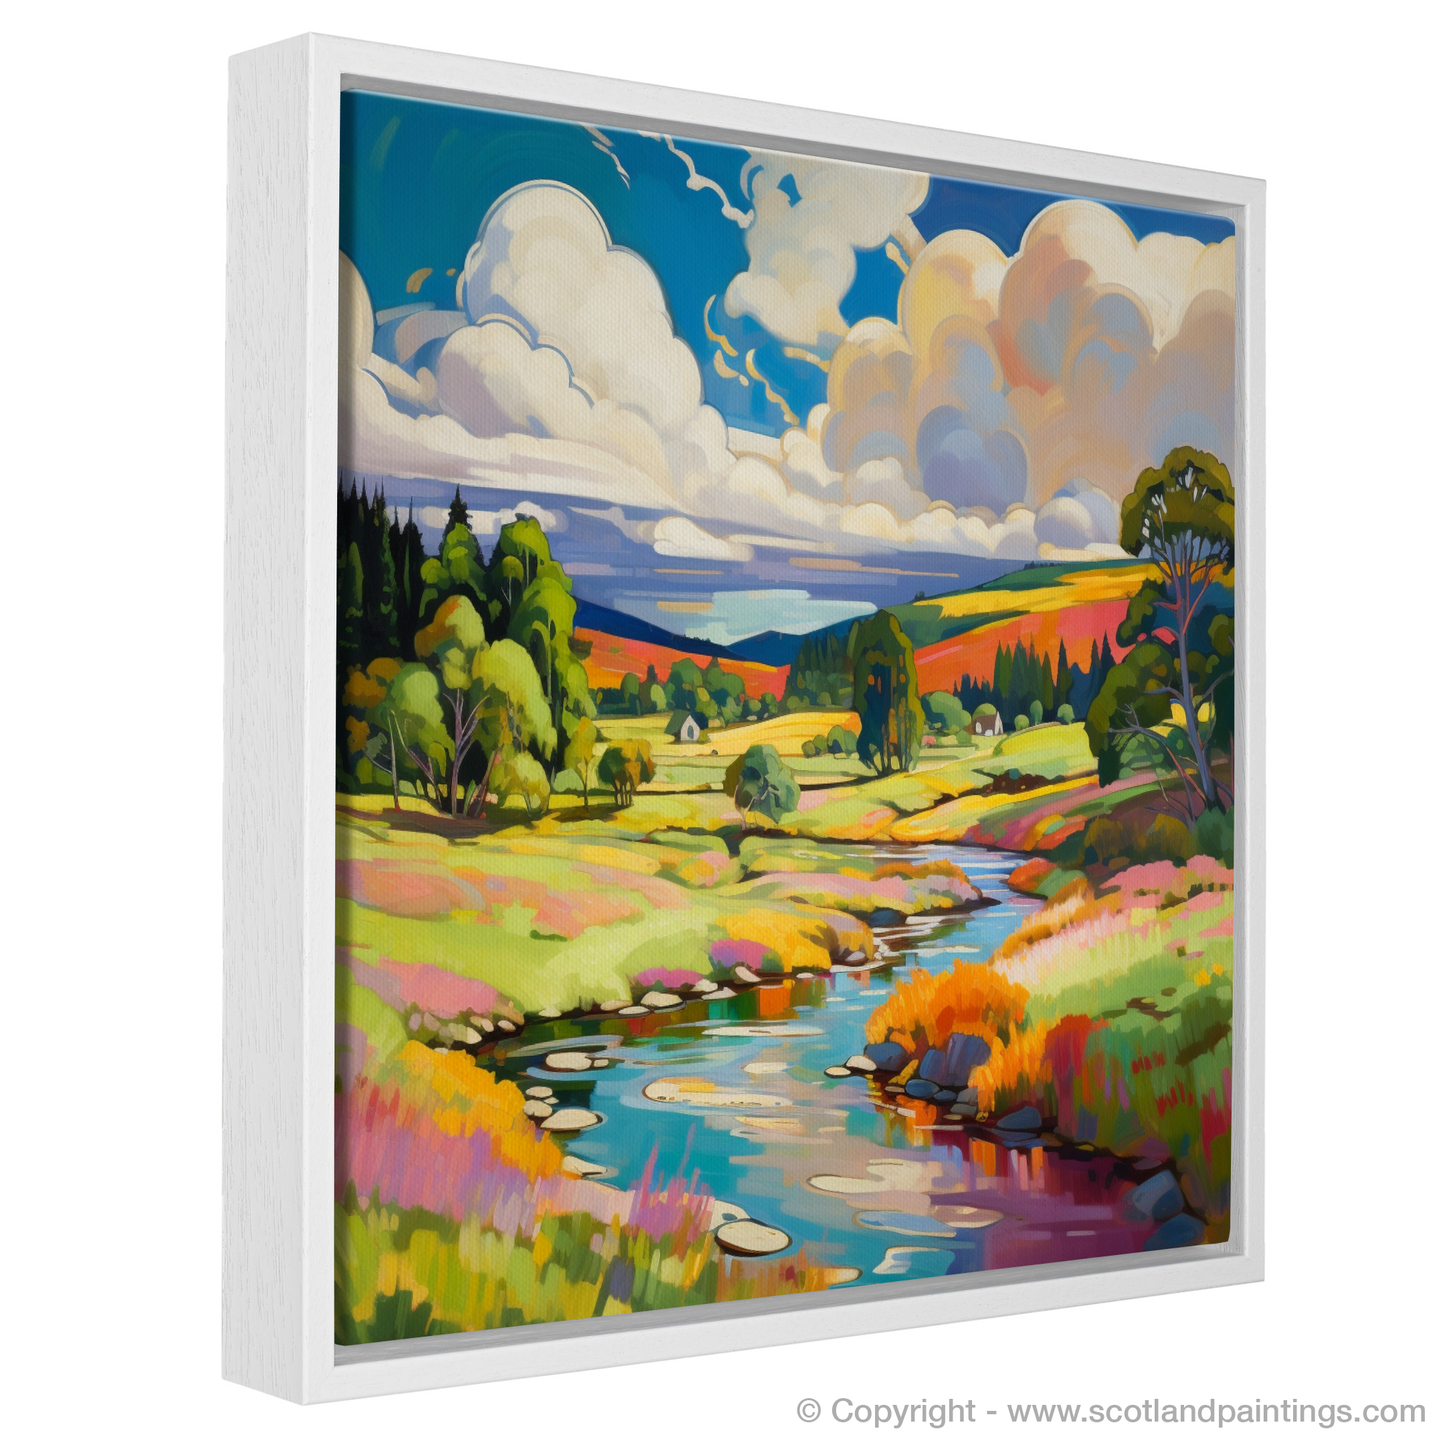 Painting and Art Print of Glen Tanar, Aberdeenshire in summer entitled "Aberdeenshire's Summer Symphony in Fauvist Hues".